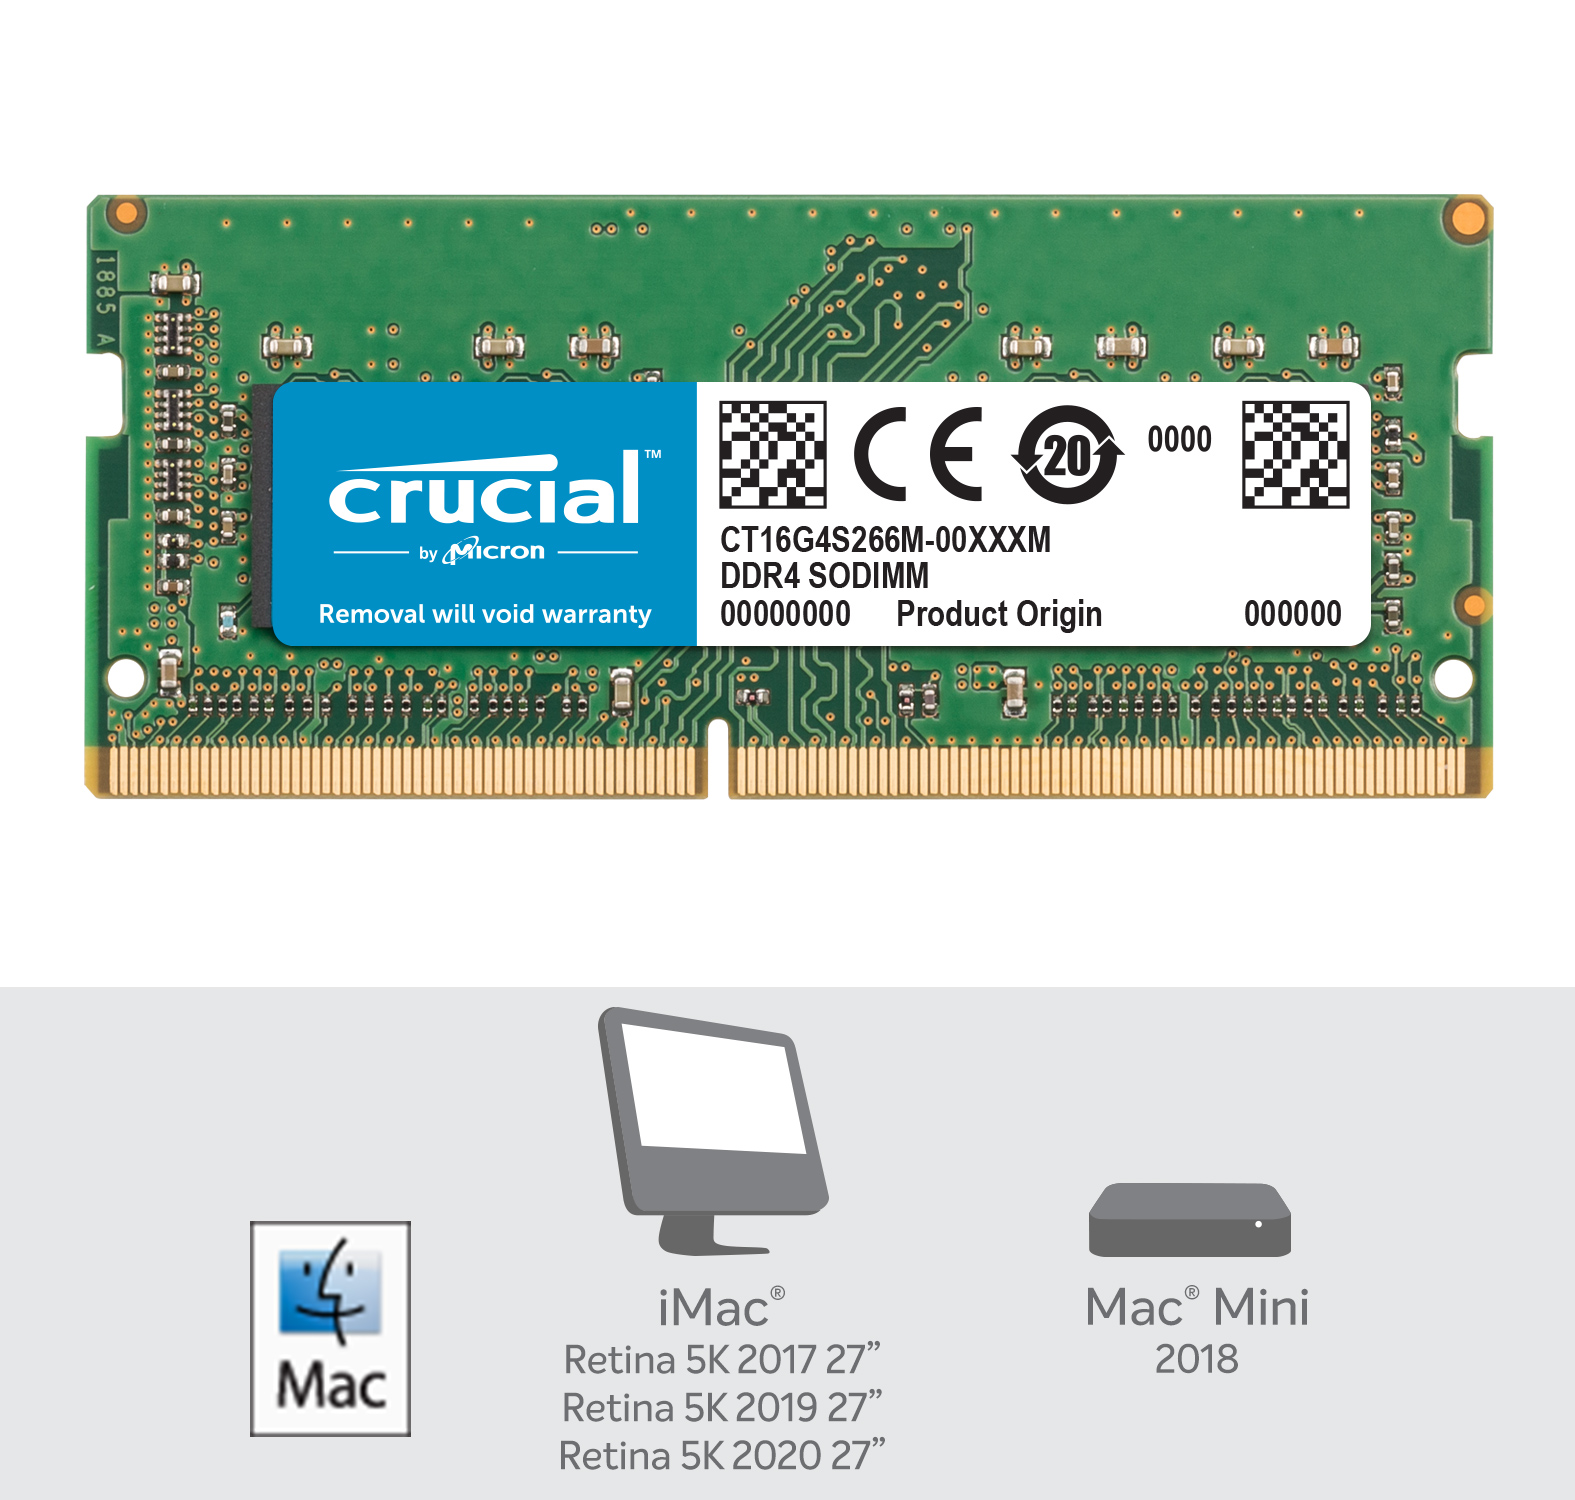 Crucial 16GB DDR4-2666 SODIMM Memory for Mac, CT16G4S266M